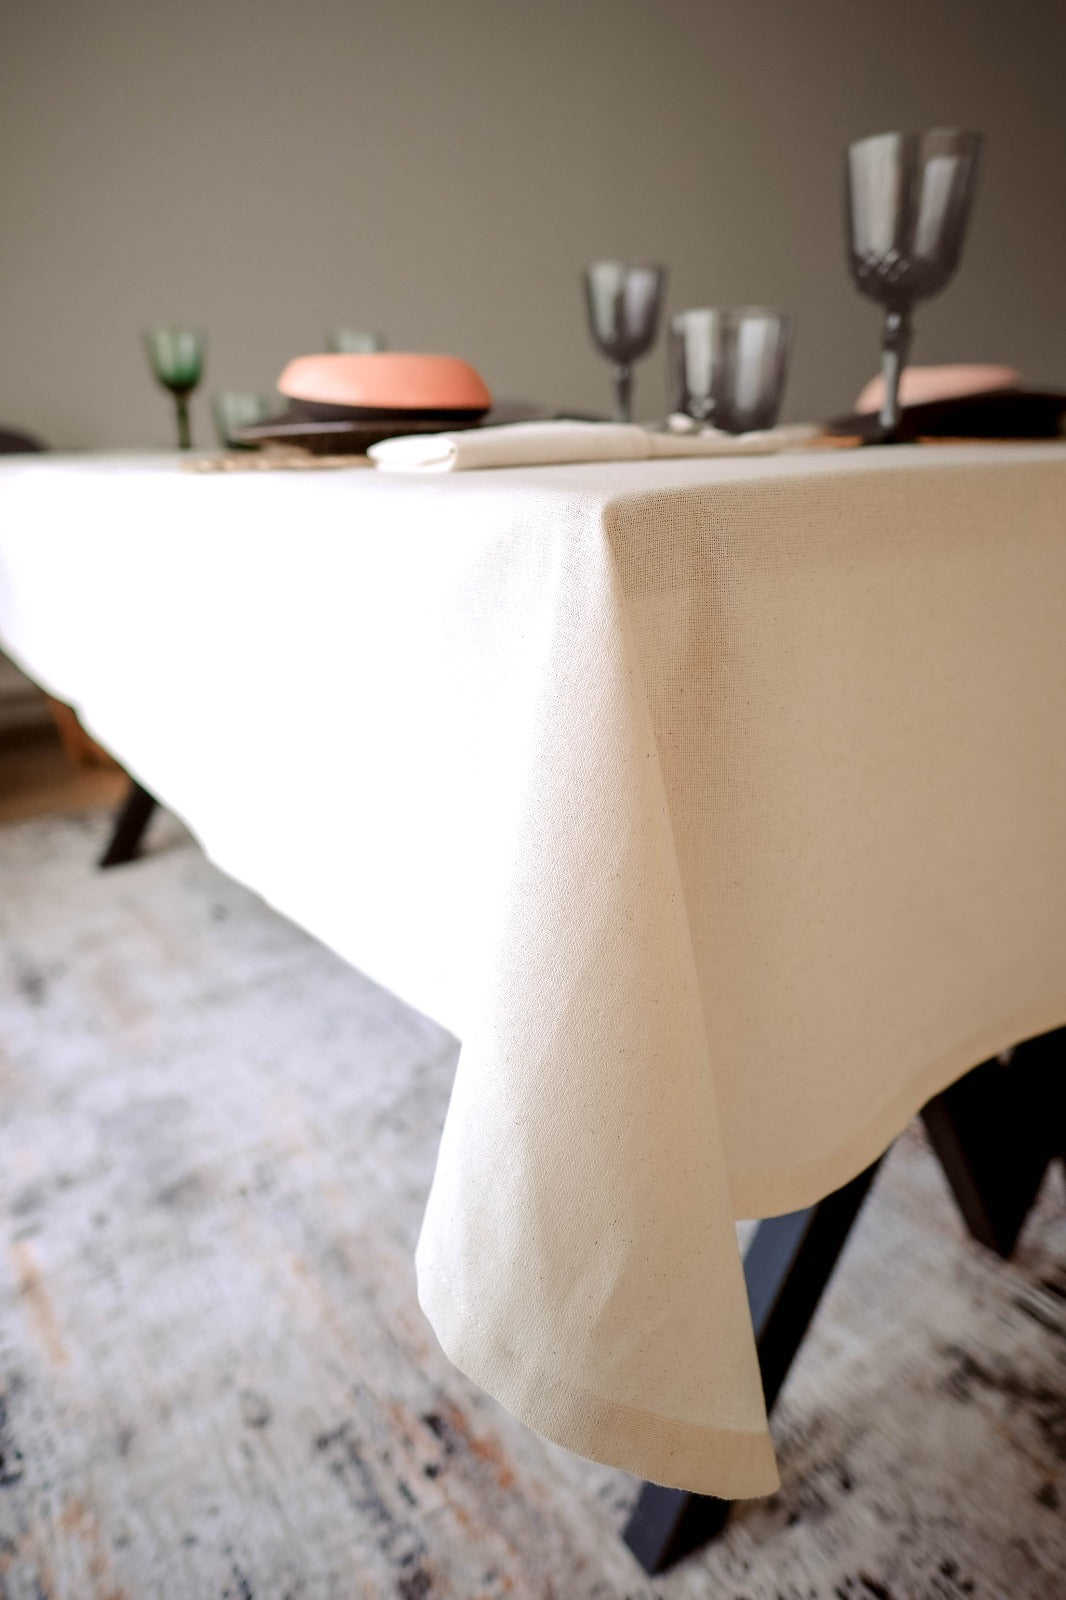 100% Pure Cotton Bohemian Dining Table Linen Table Cloth, Boho Style Plain Cream Pure Cotton Table Cover Tablecloth Linen Look Solid Beige